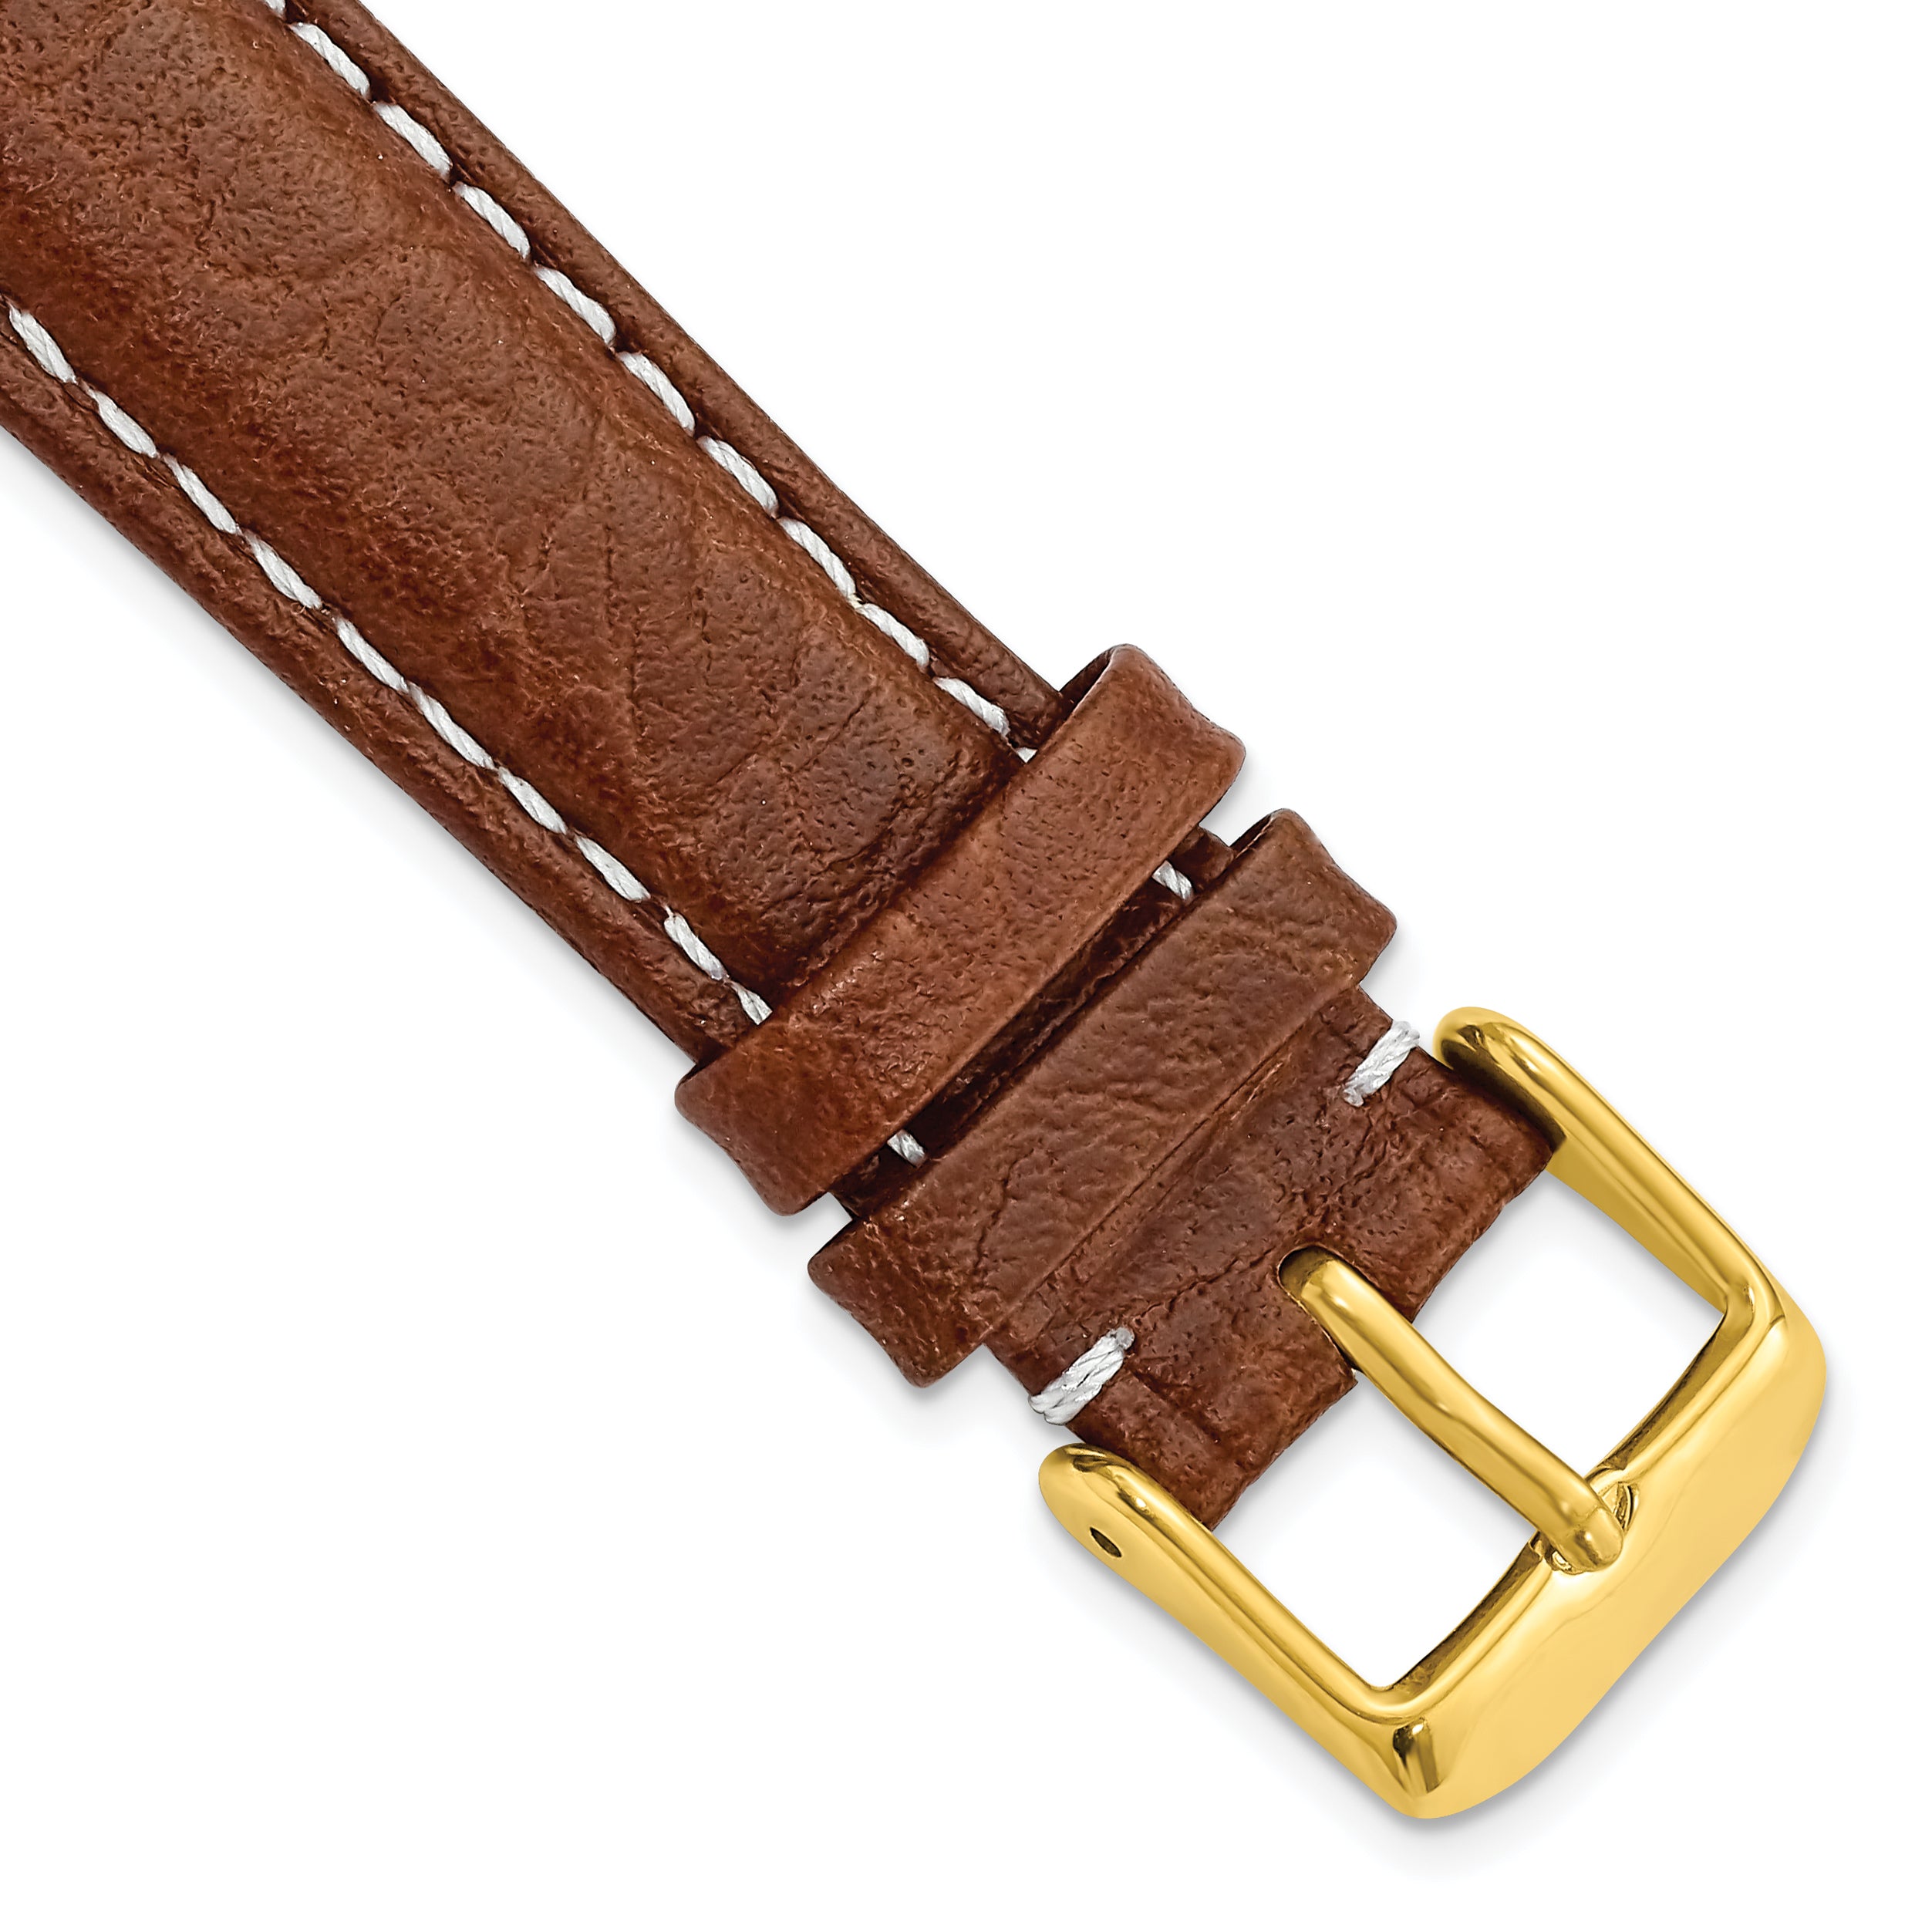 DeBeer 19mm Havana Sport Leather with White Stitching and Gold-tone Buckle 7.5 inch Watch Band